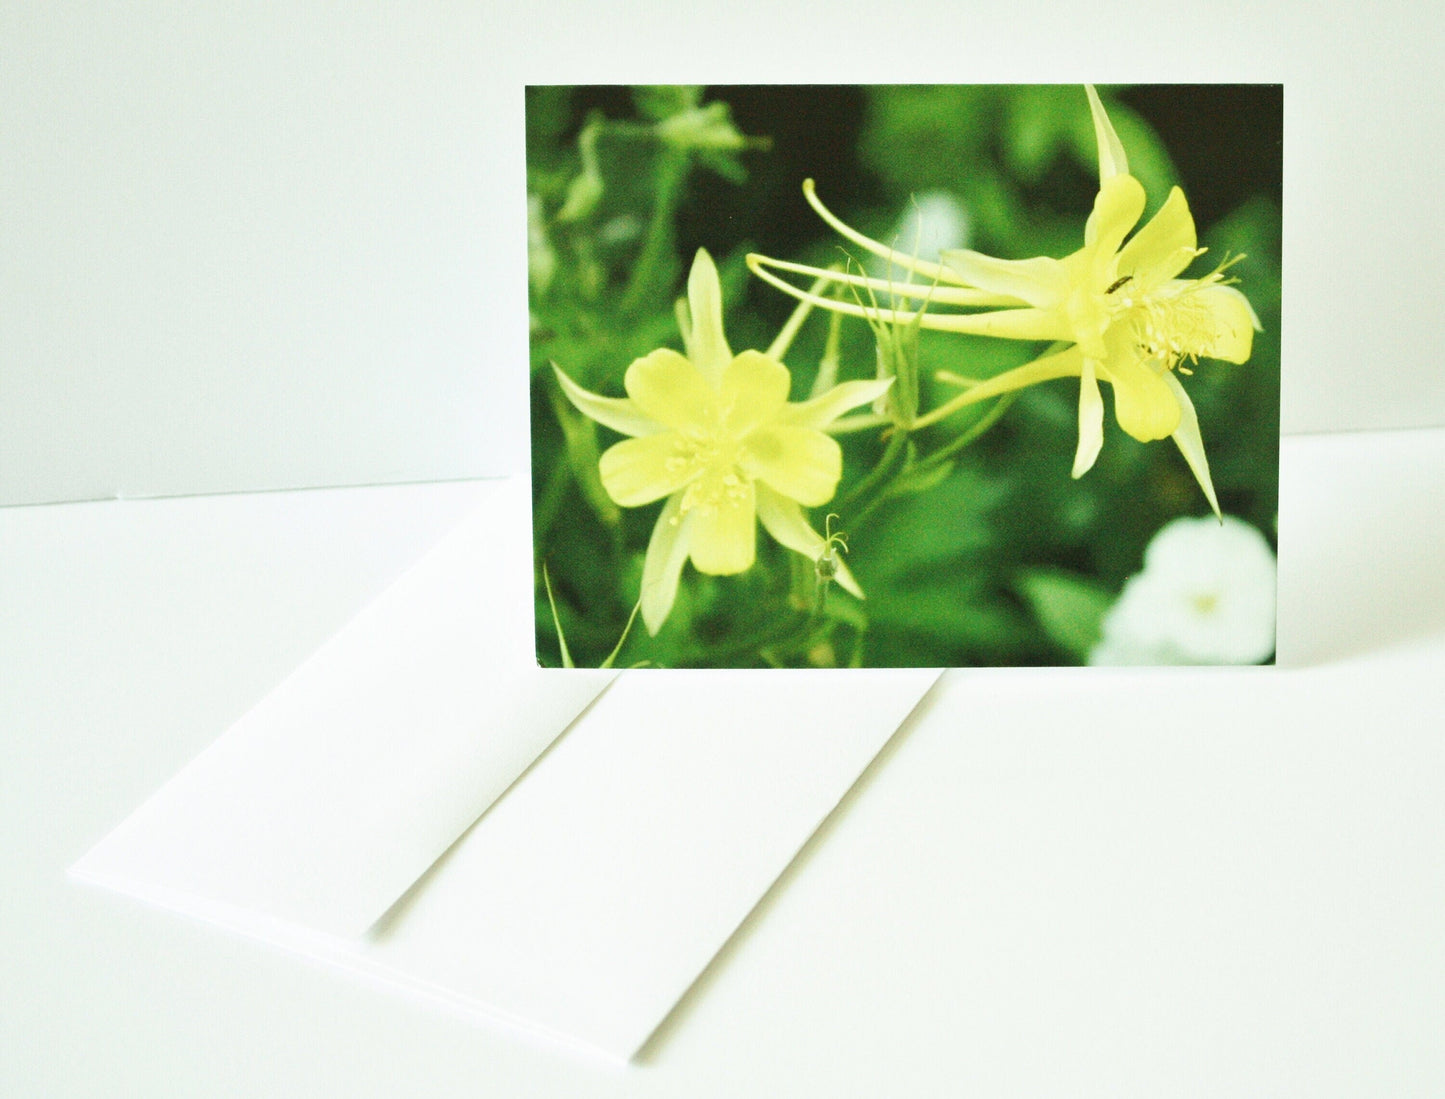 Blank Note Cards & Envelopes Original Photographs Many designs available Flower lovers personal gift unique photo card